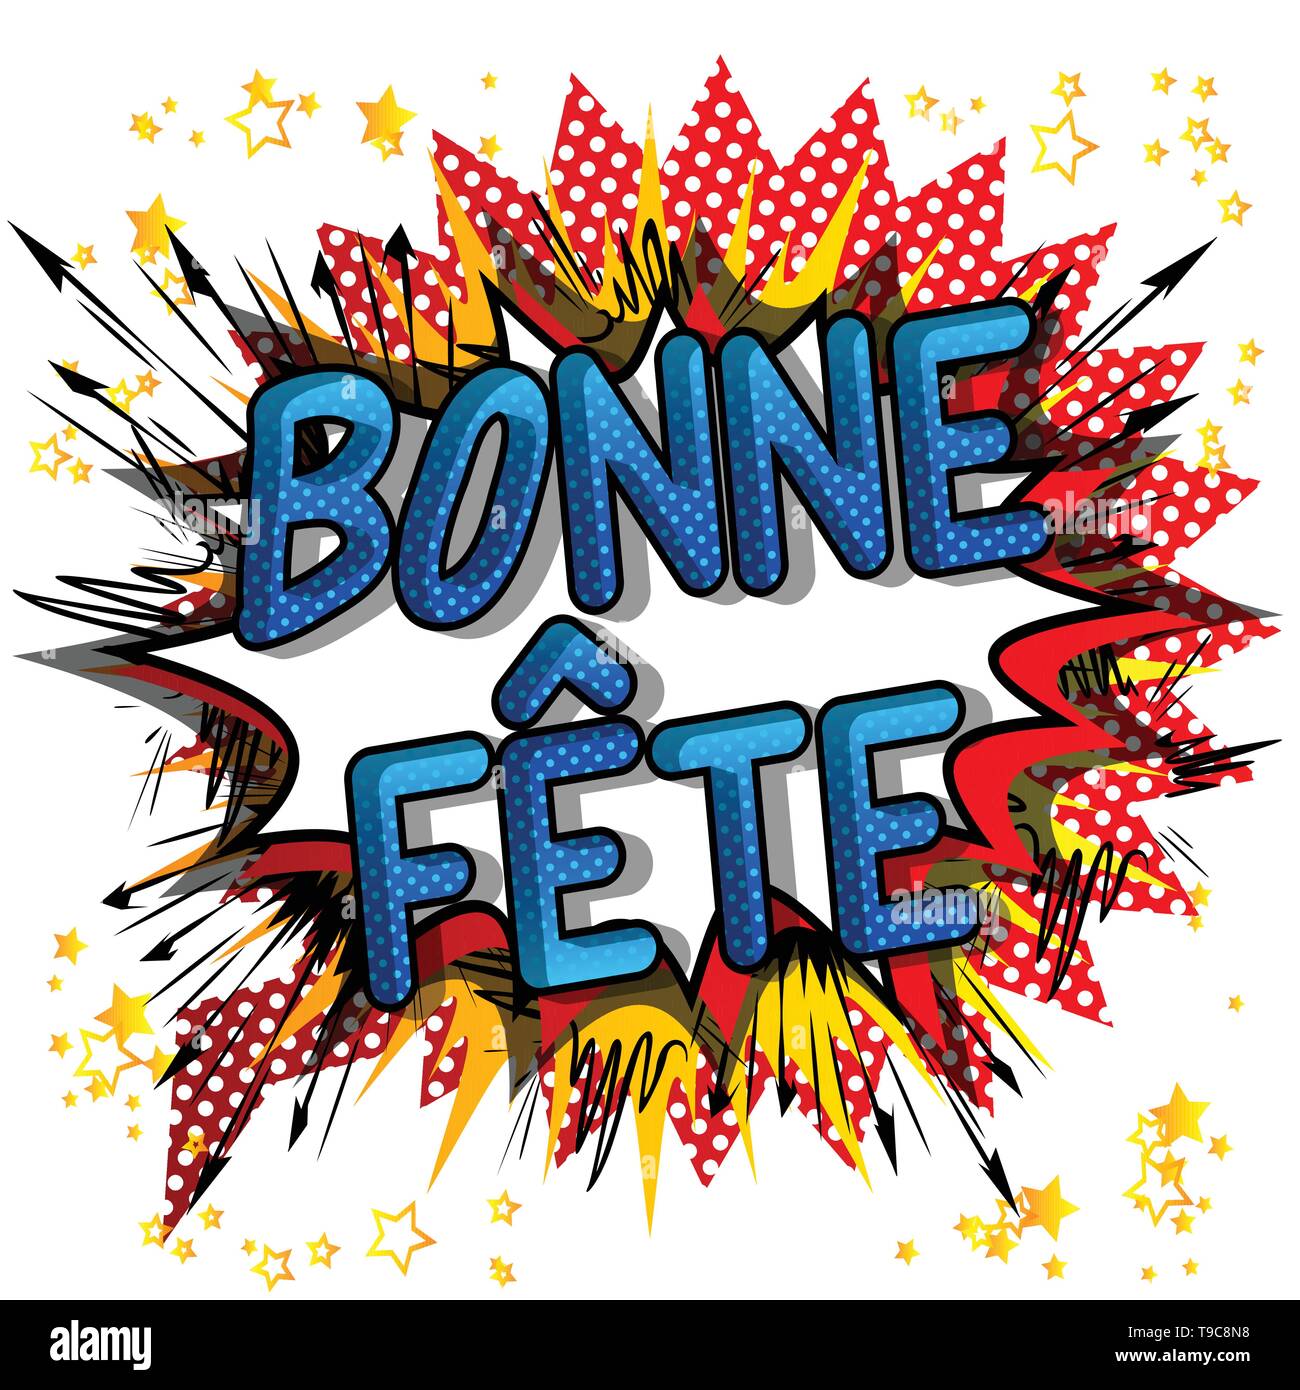 Bonne Fete Have A Good Celebration In Franch And Happy Birthday In Canada Vector Comic Book Words Stock Vector Image Art Alamy